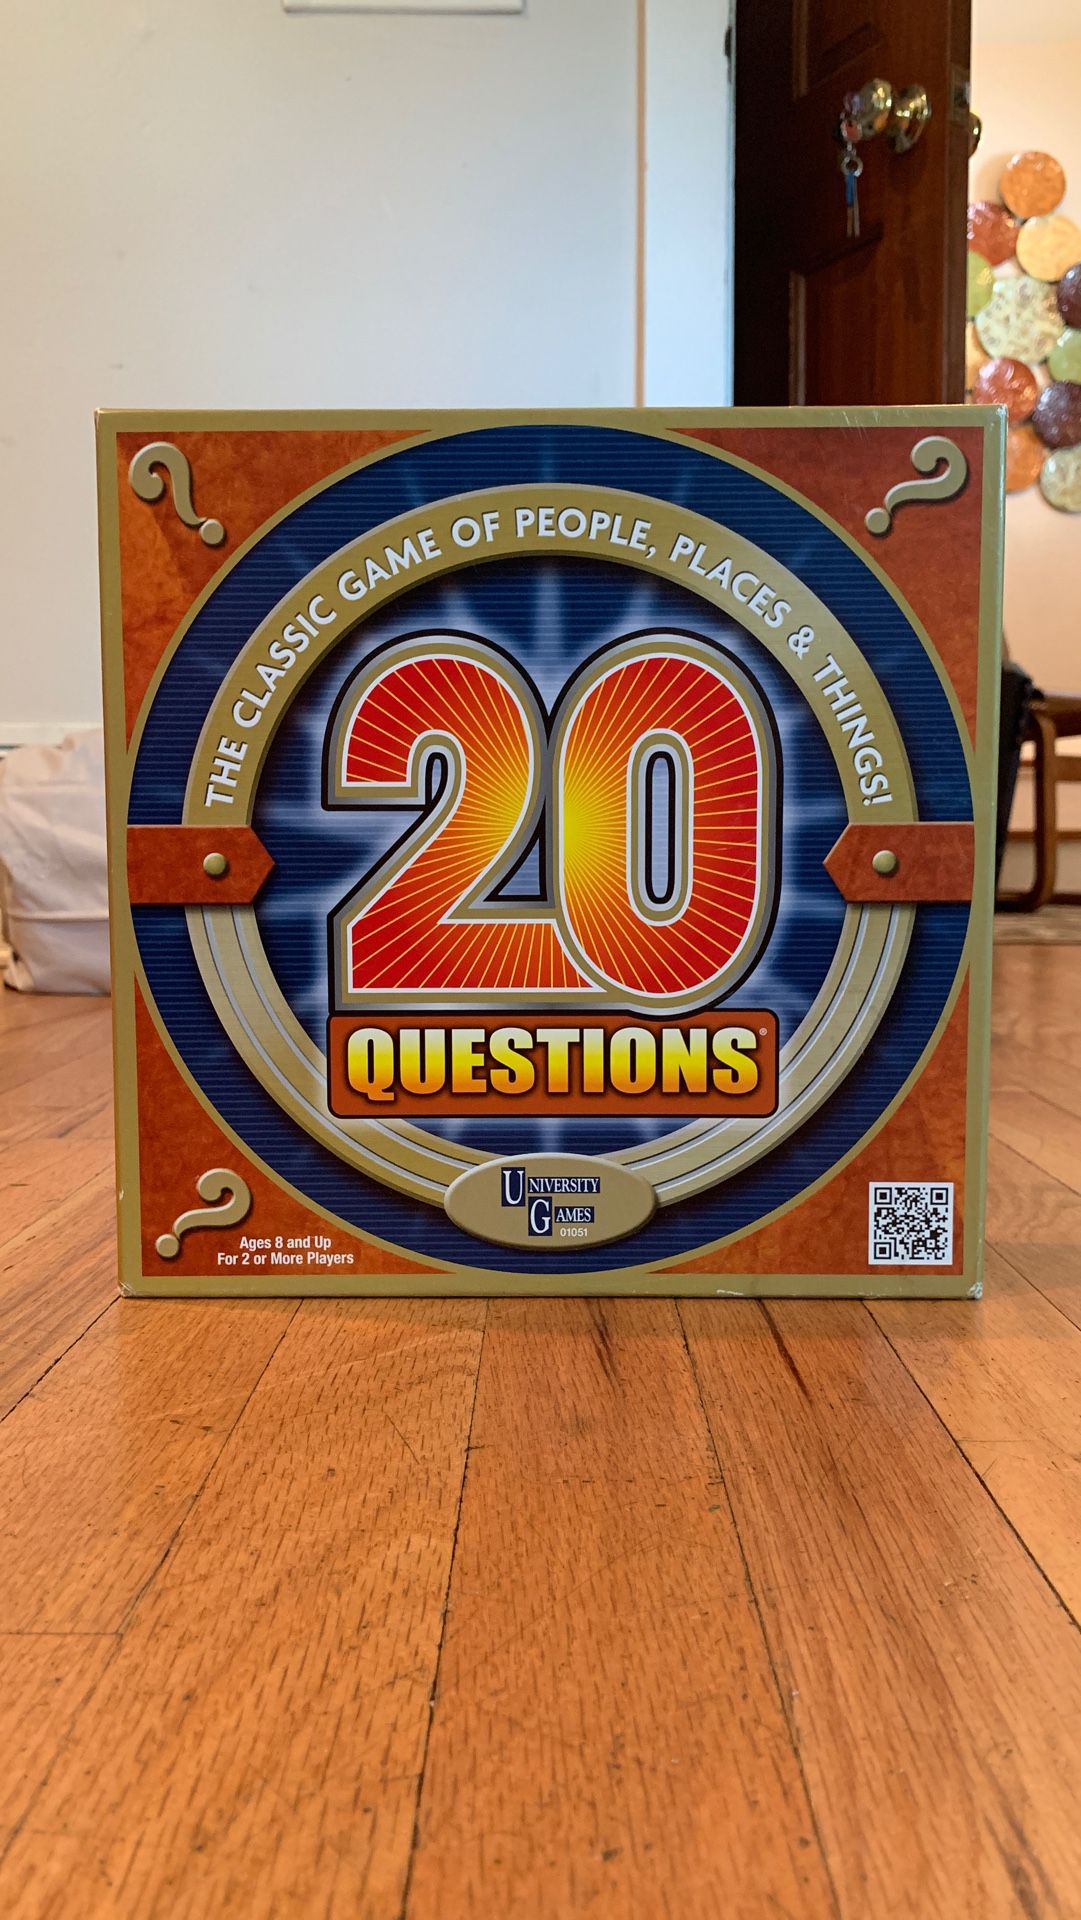 20 Questions by University Games